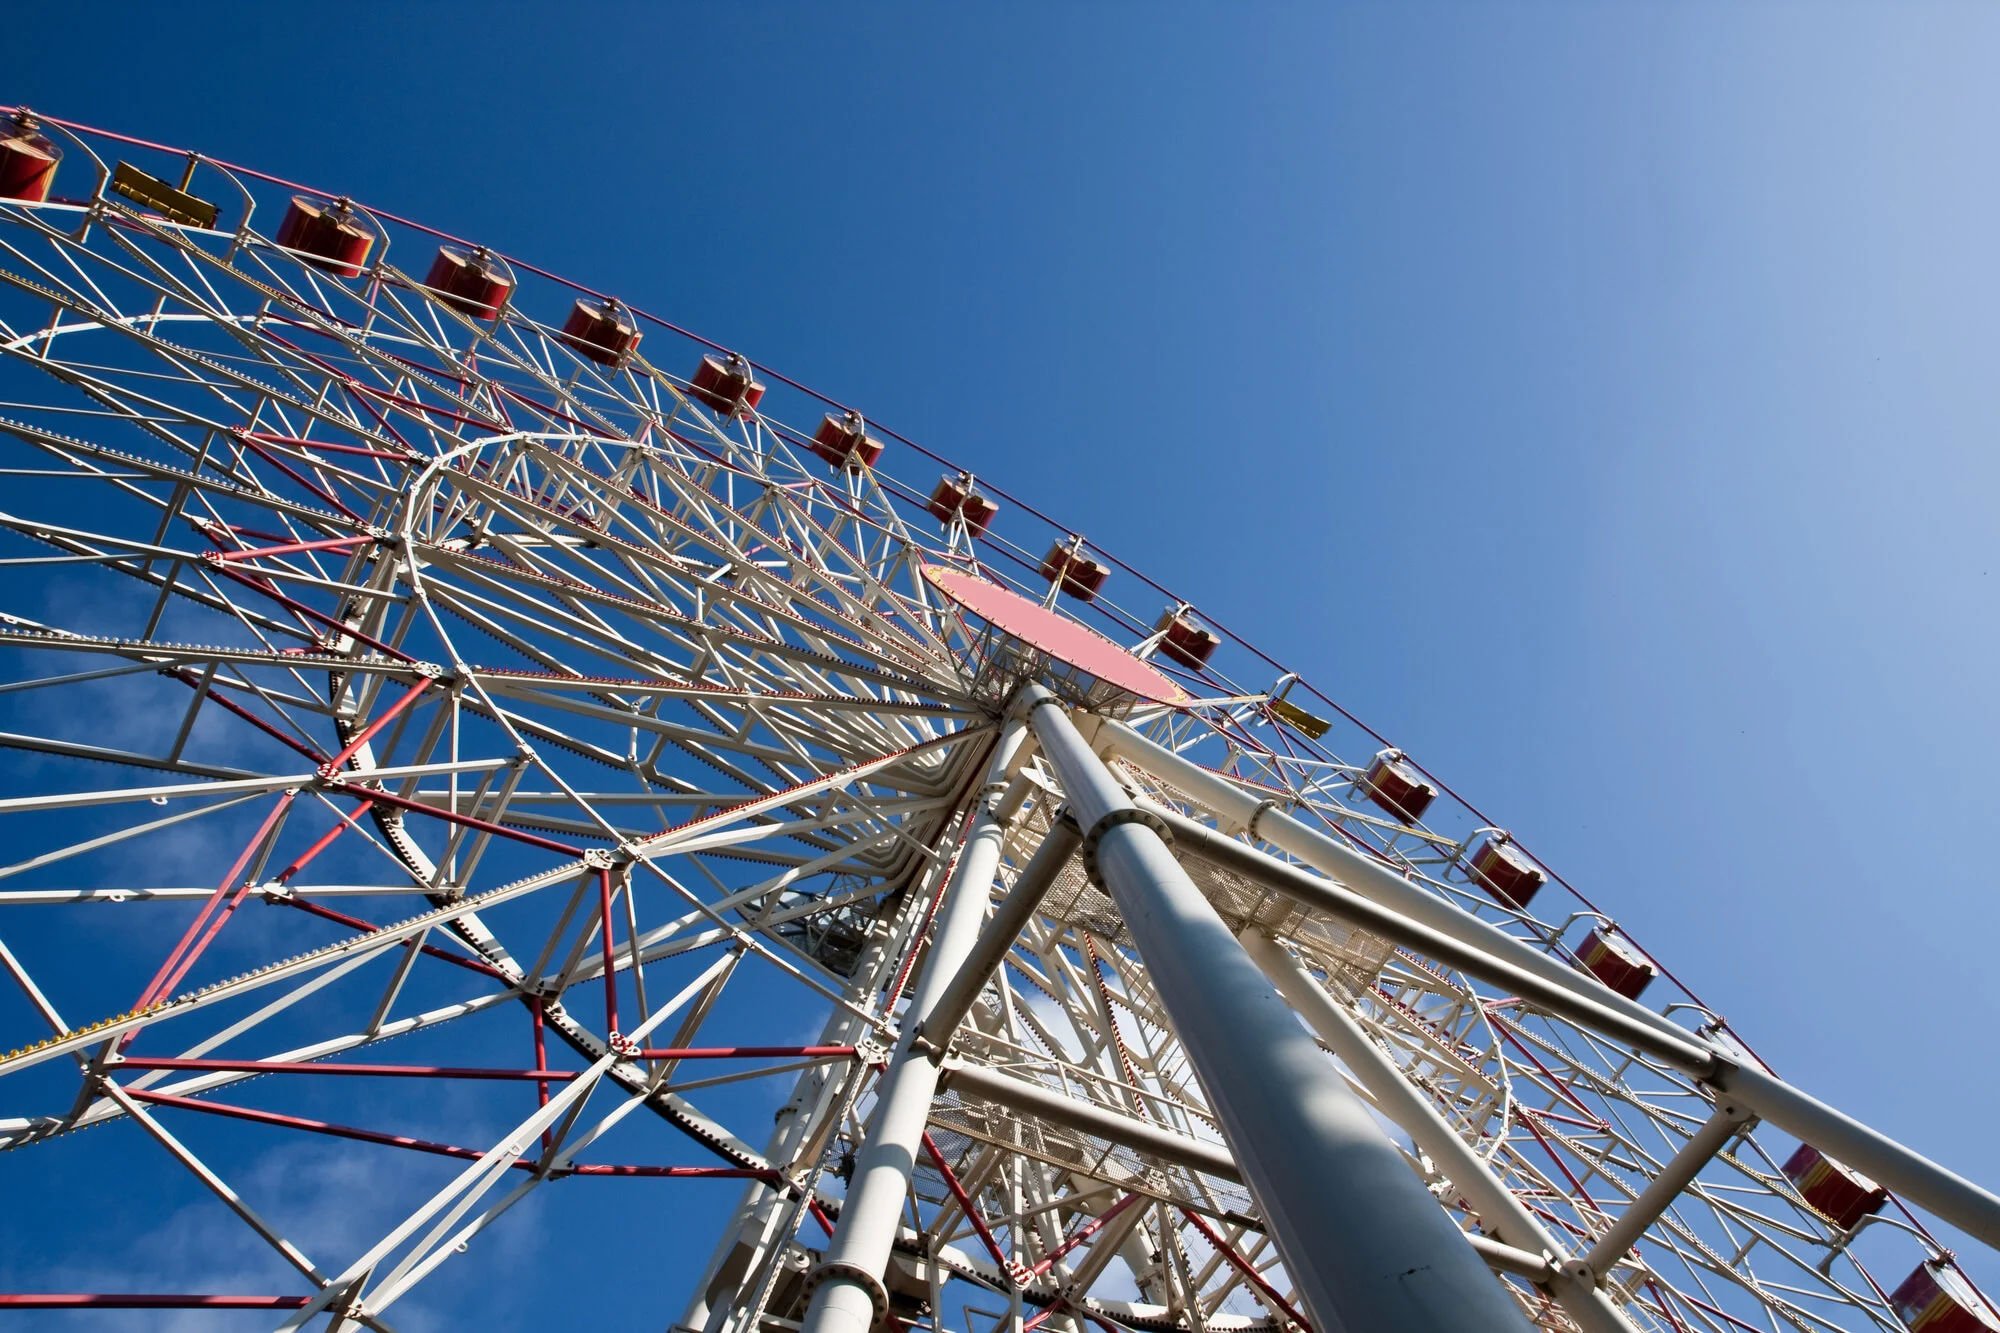 Daring Couple Have Sex On Ohio Amusement Parks Ferris Wheel Gets Arrested